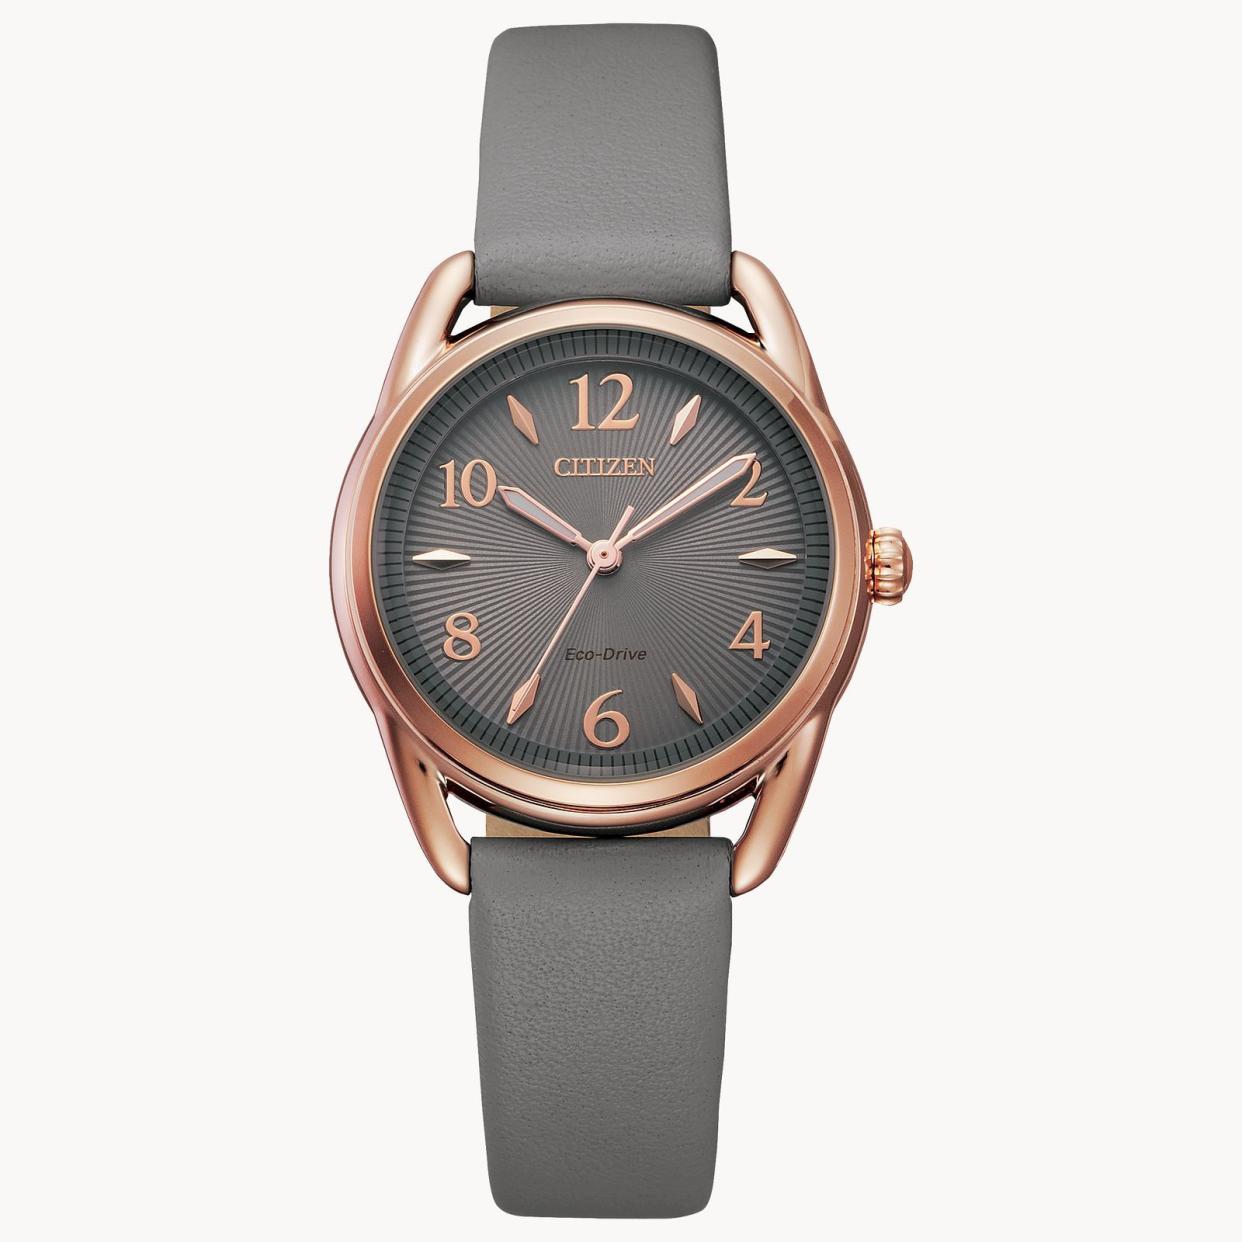 Drive from Citizen Eco-Drive Women's Leather Watch